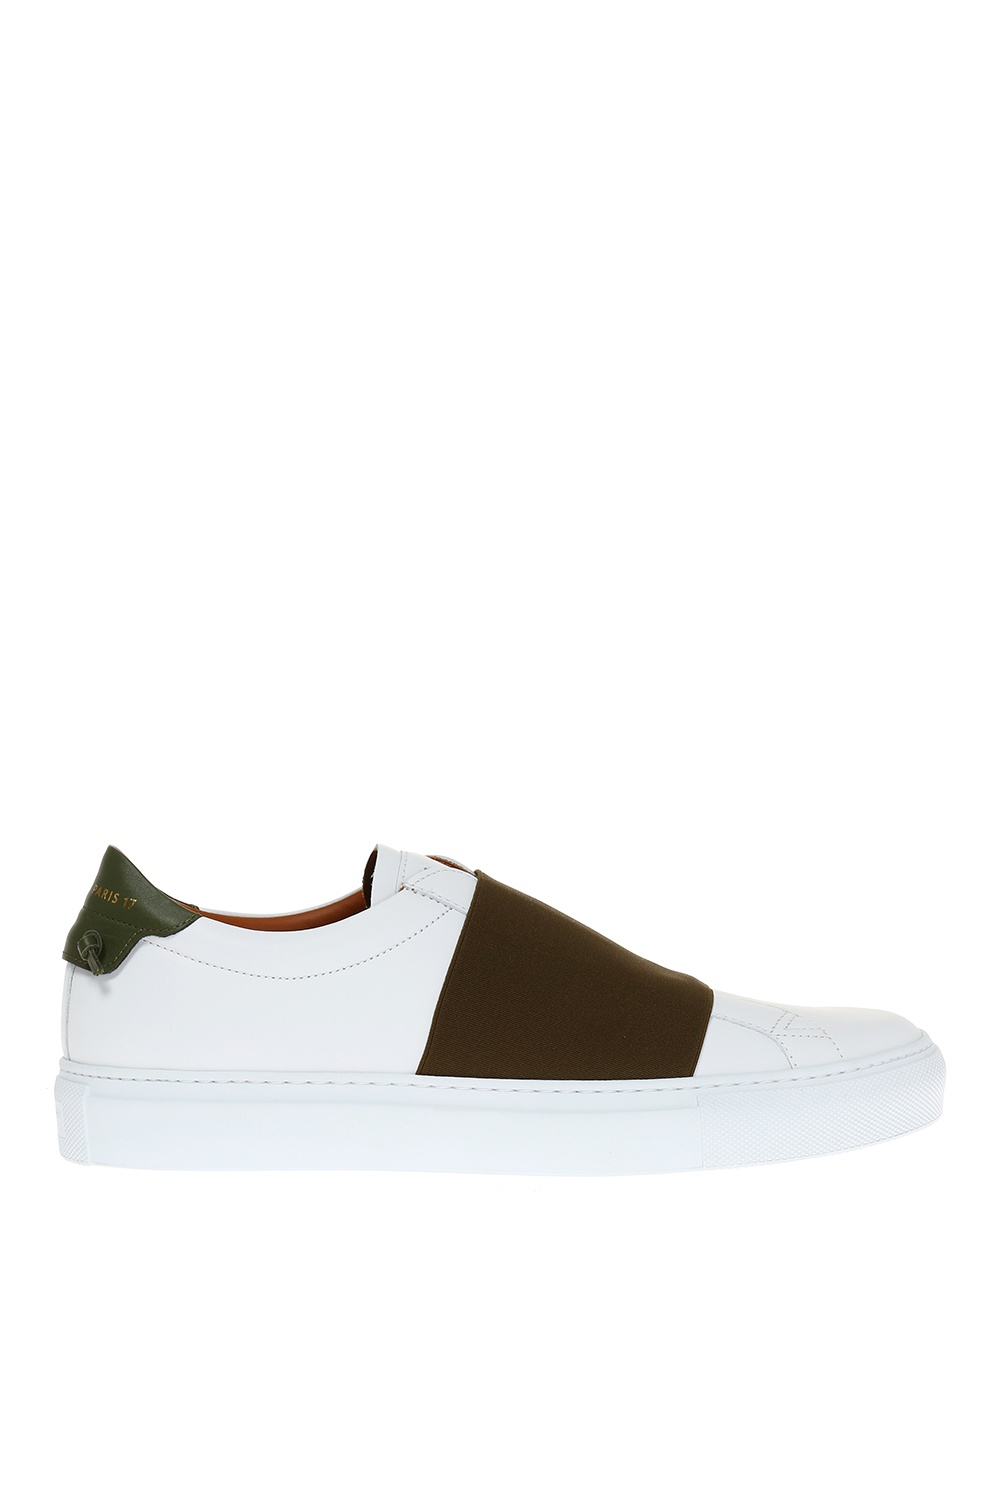 givenchy elastic strap sneakers